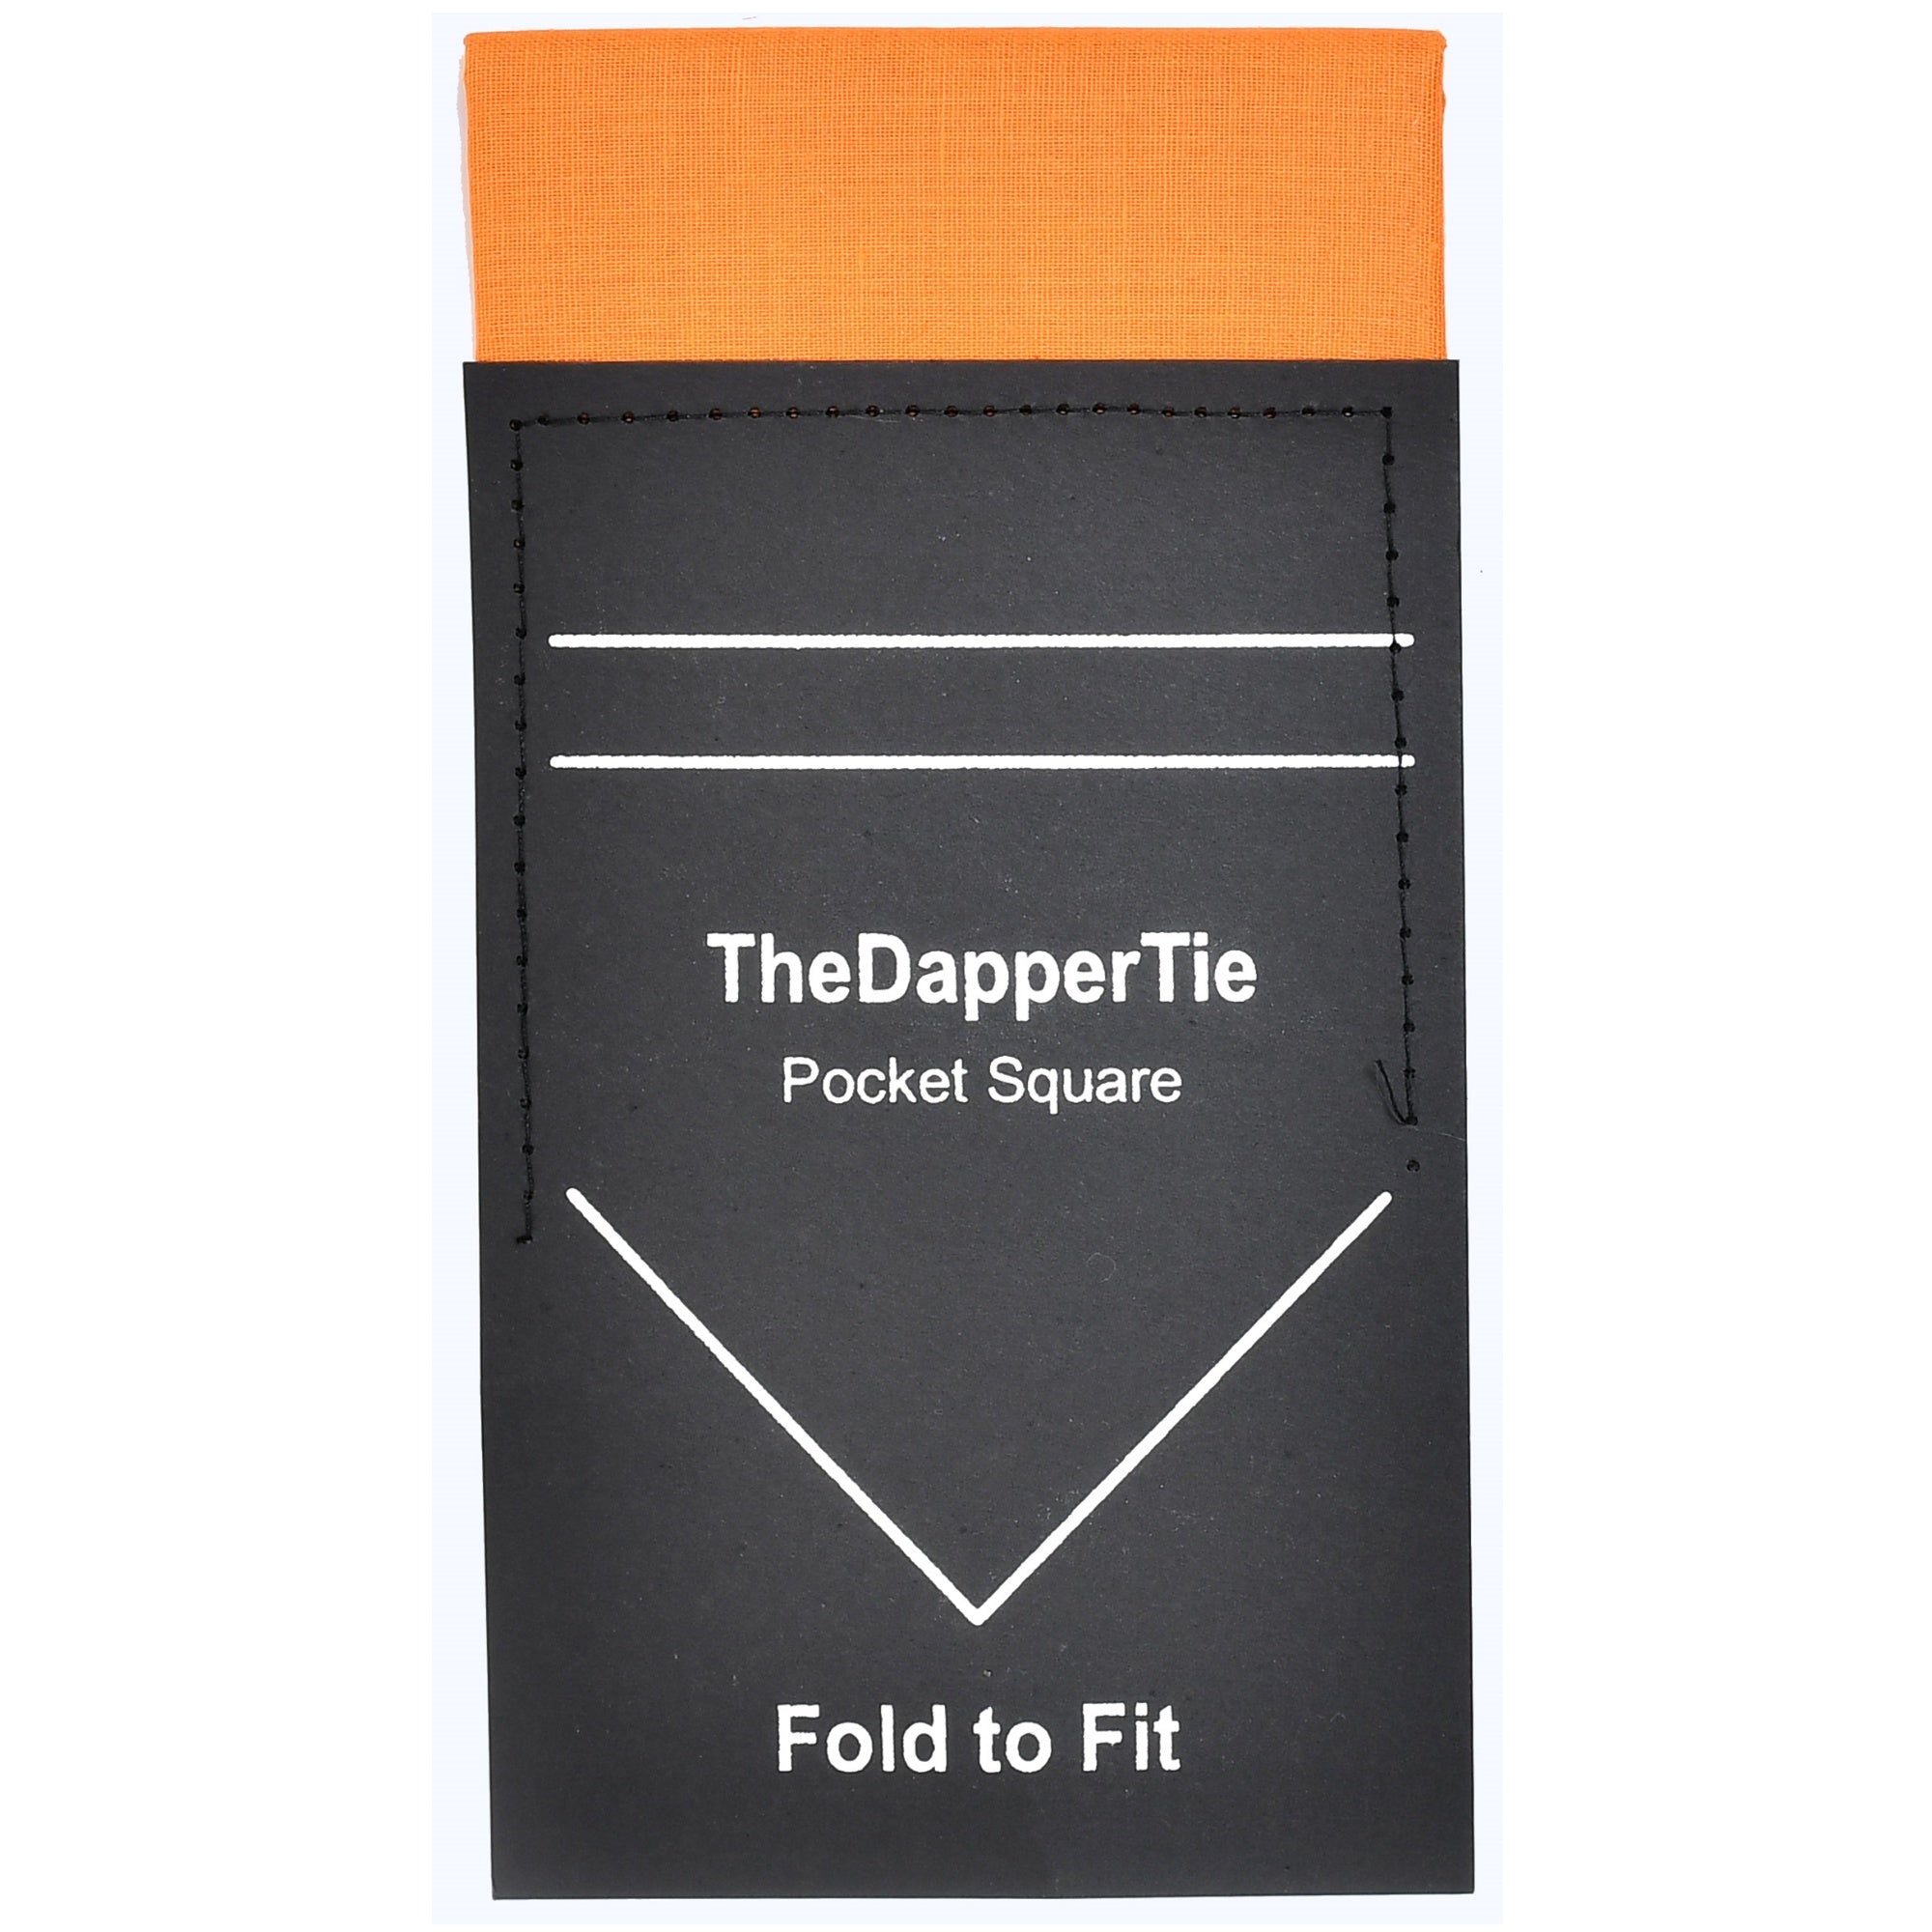 TheDapperTie - Men's Extra Thick Cotton Flat Pre Folded Pocket Square on Card Prefolded Pocket Squares TheDapperTie Orange Regular 